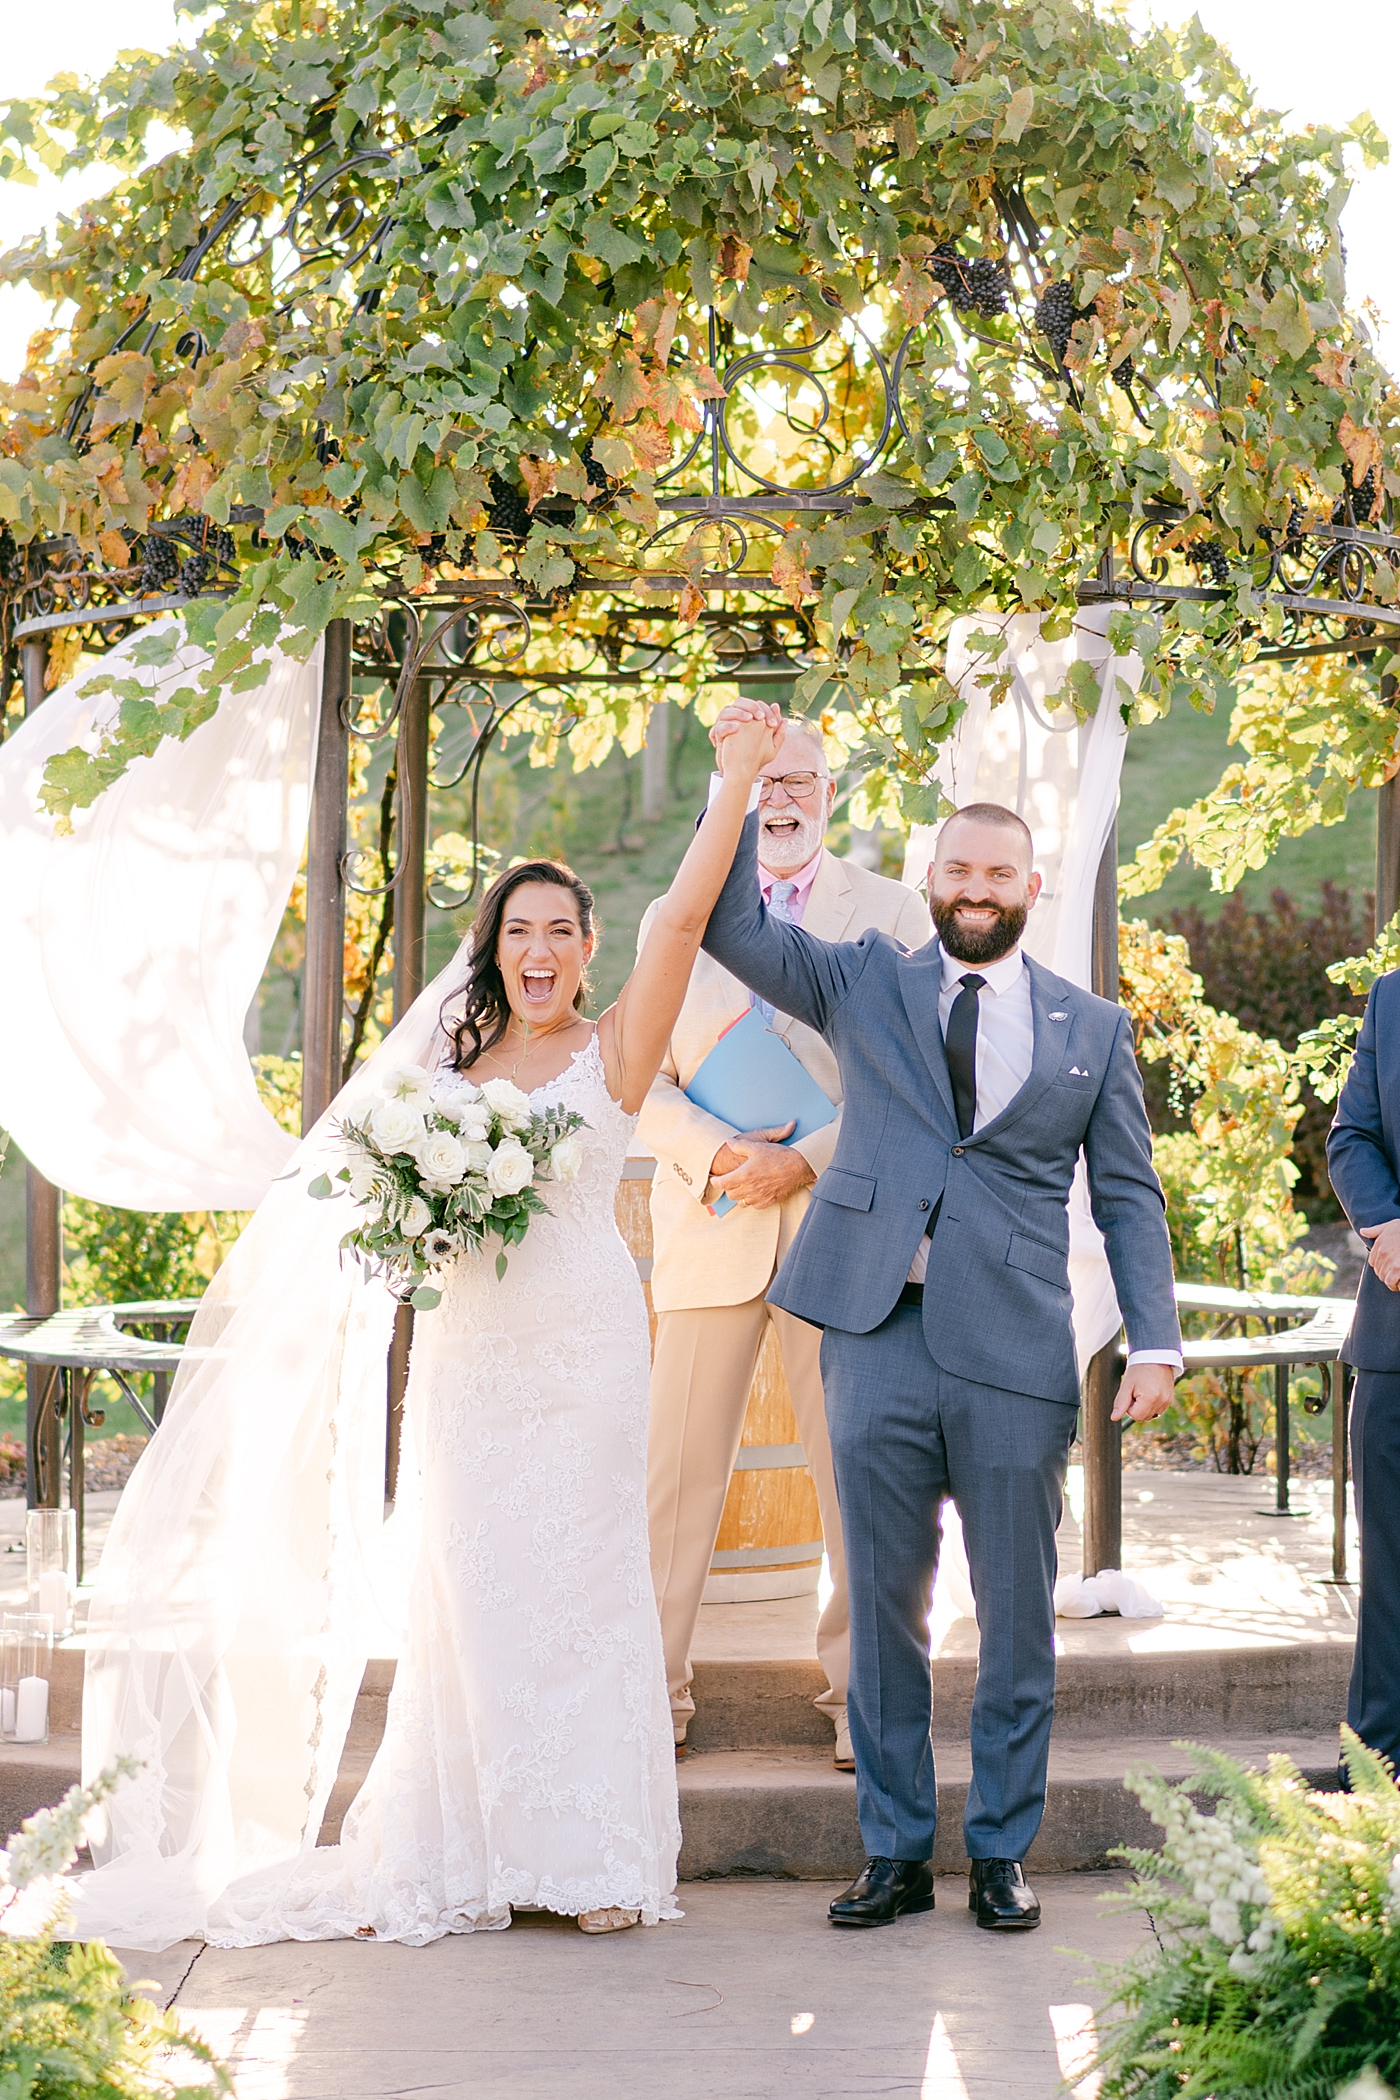 Bride and groom cheering after their vows at folino estate | Photo by Hope Helmuth Photography